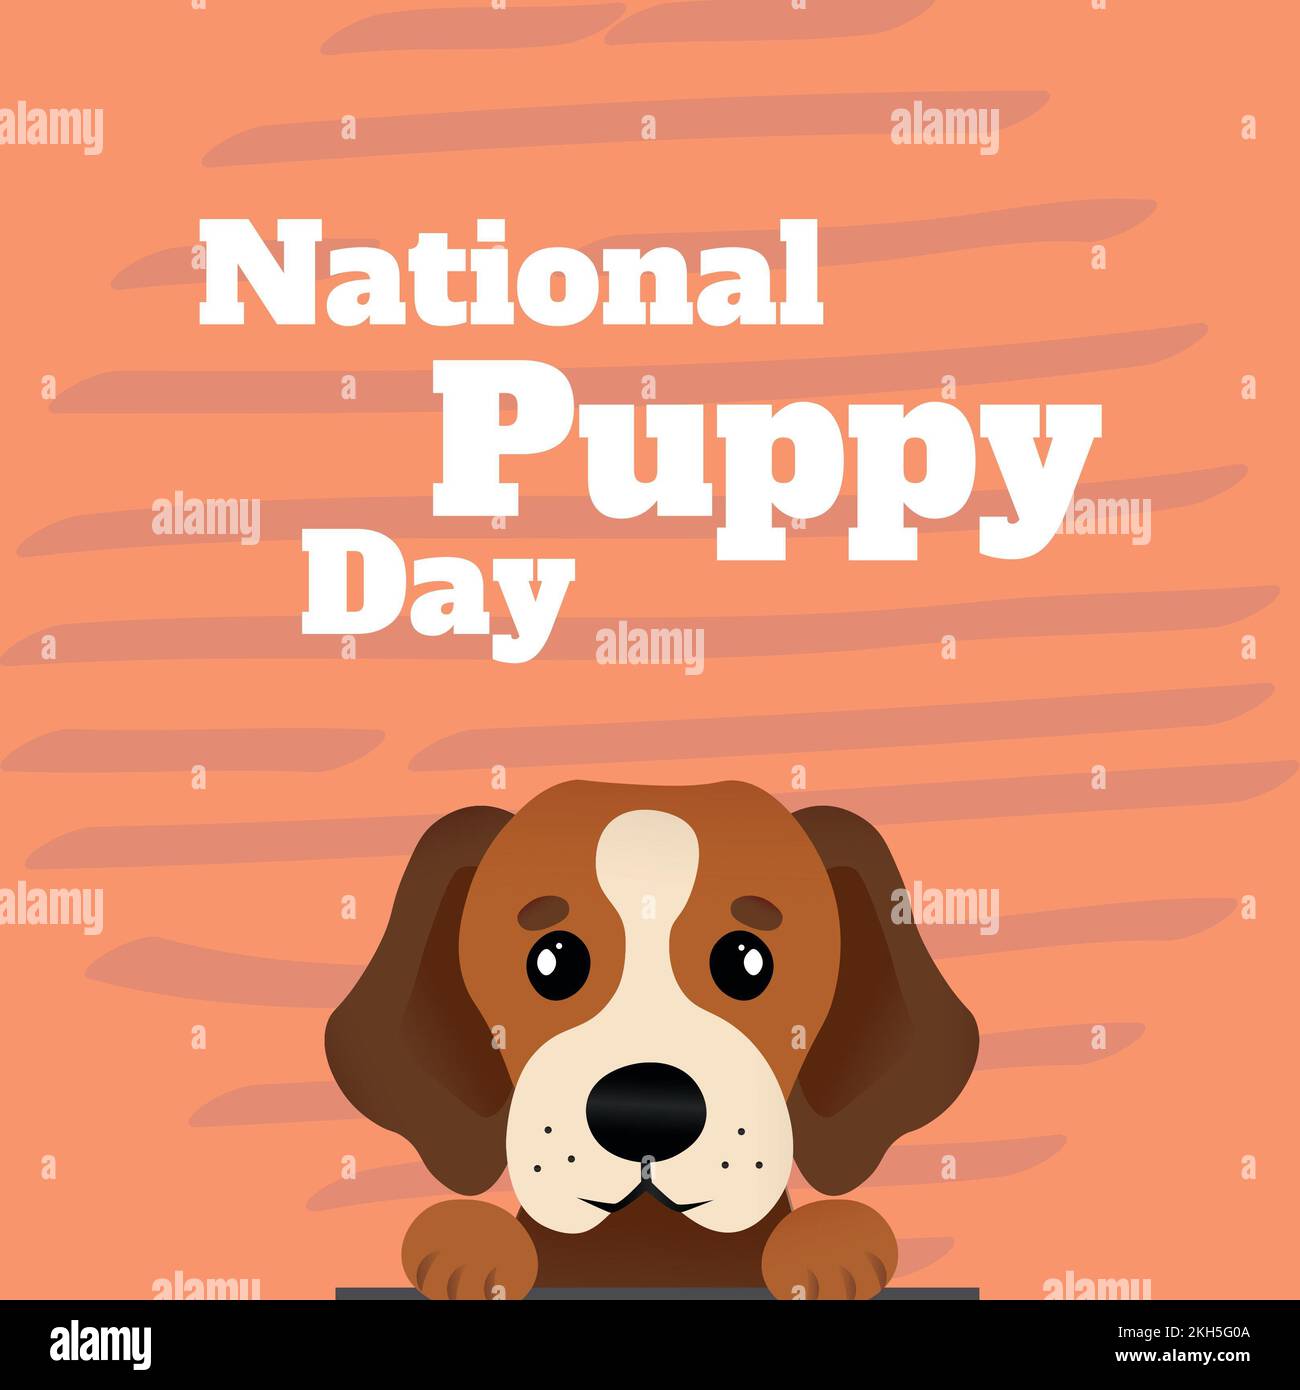 Composition of national puppy day text over dog icon Stock Photo